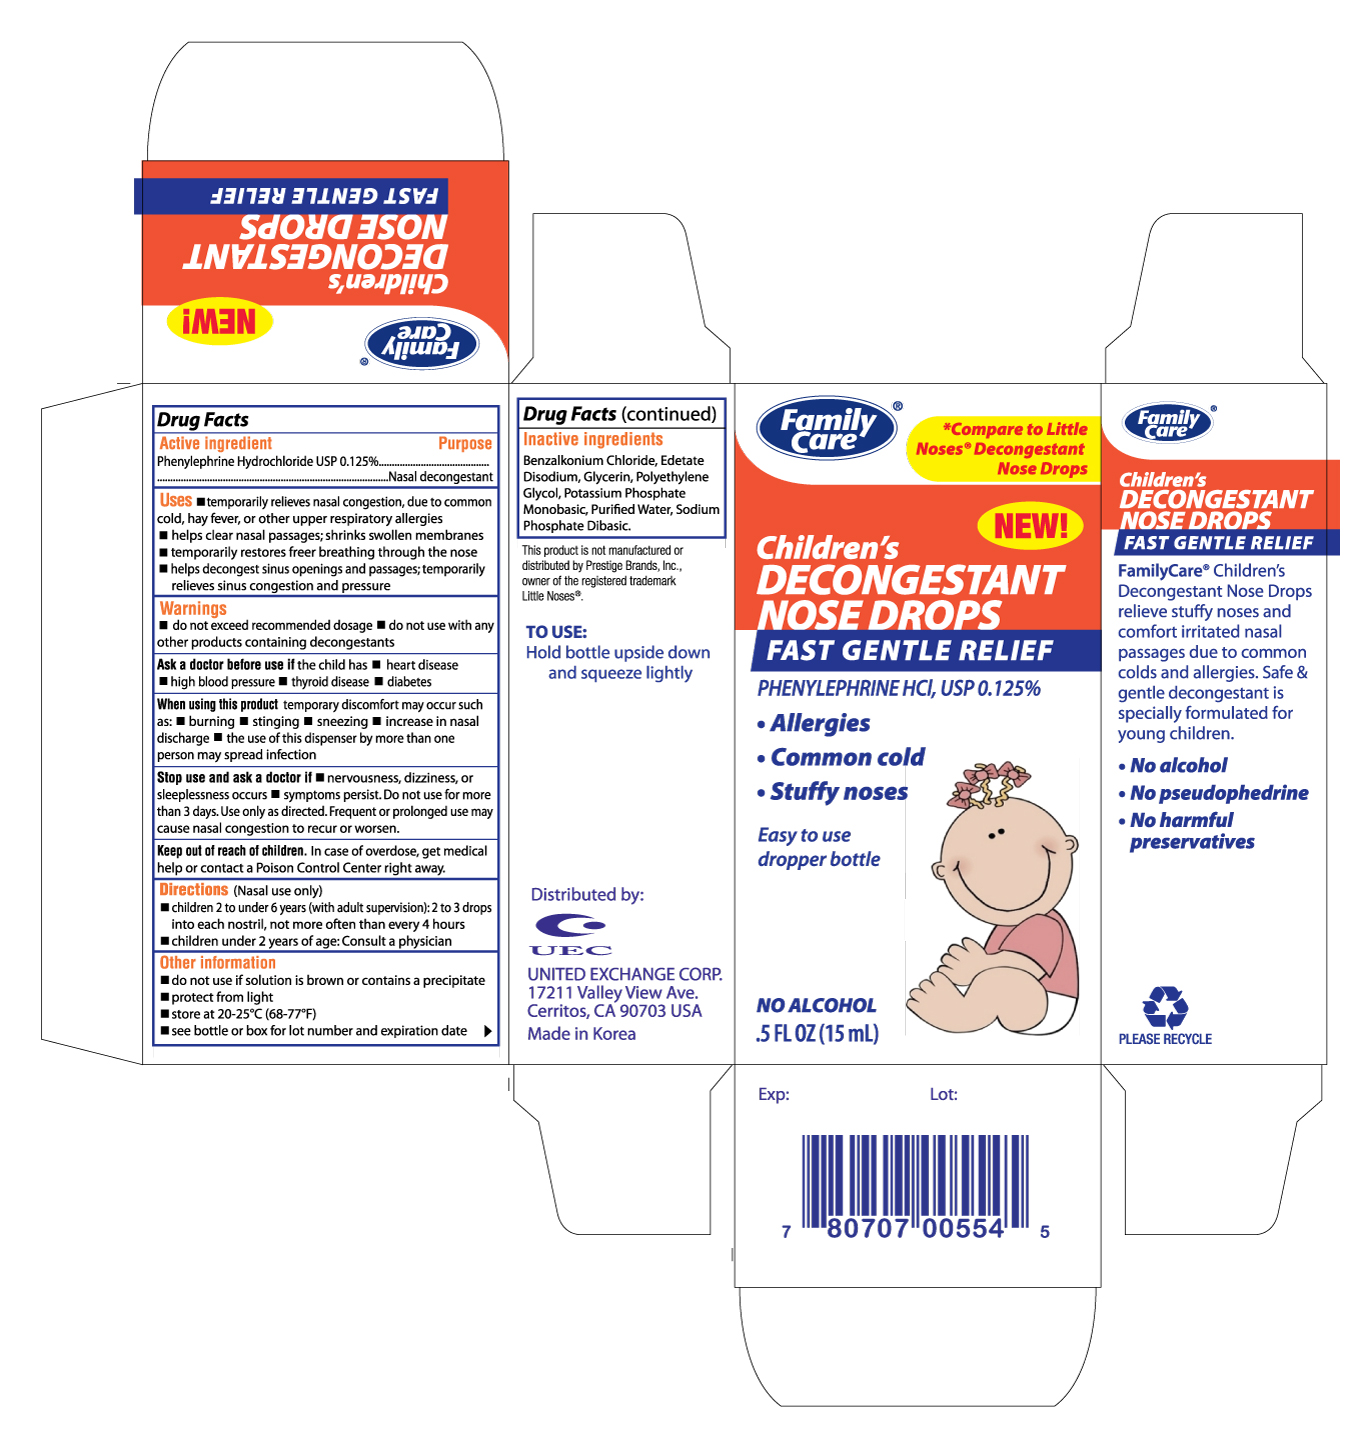 Family Care Childrens Decongestant Nose Drops | Phenylephrine Hydrochloride Solution while Breastfeeding